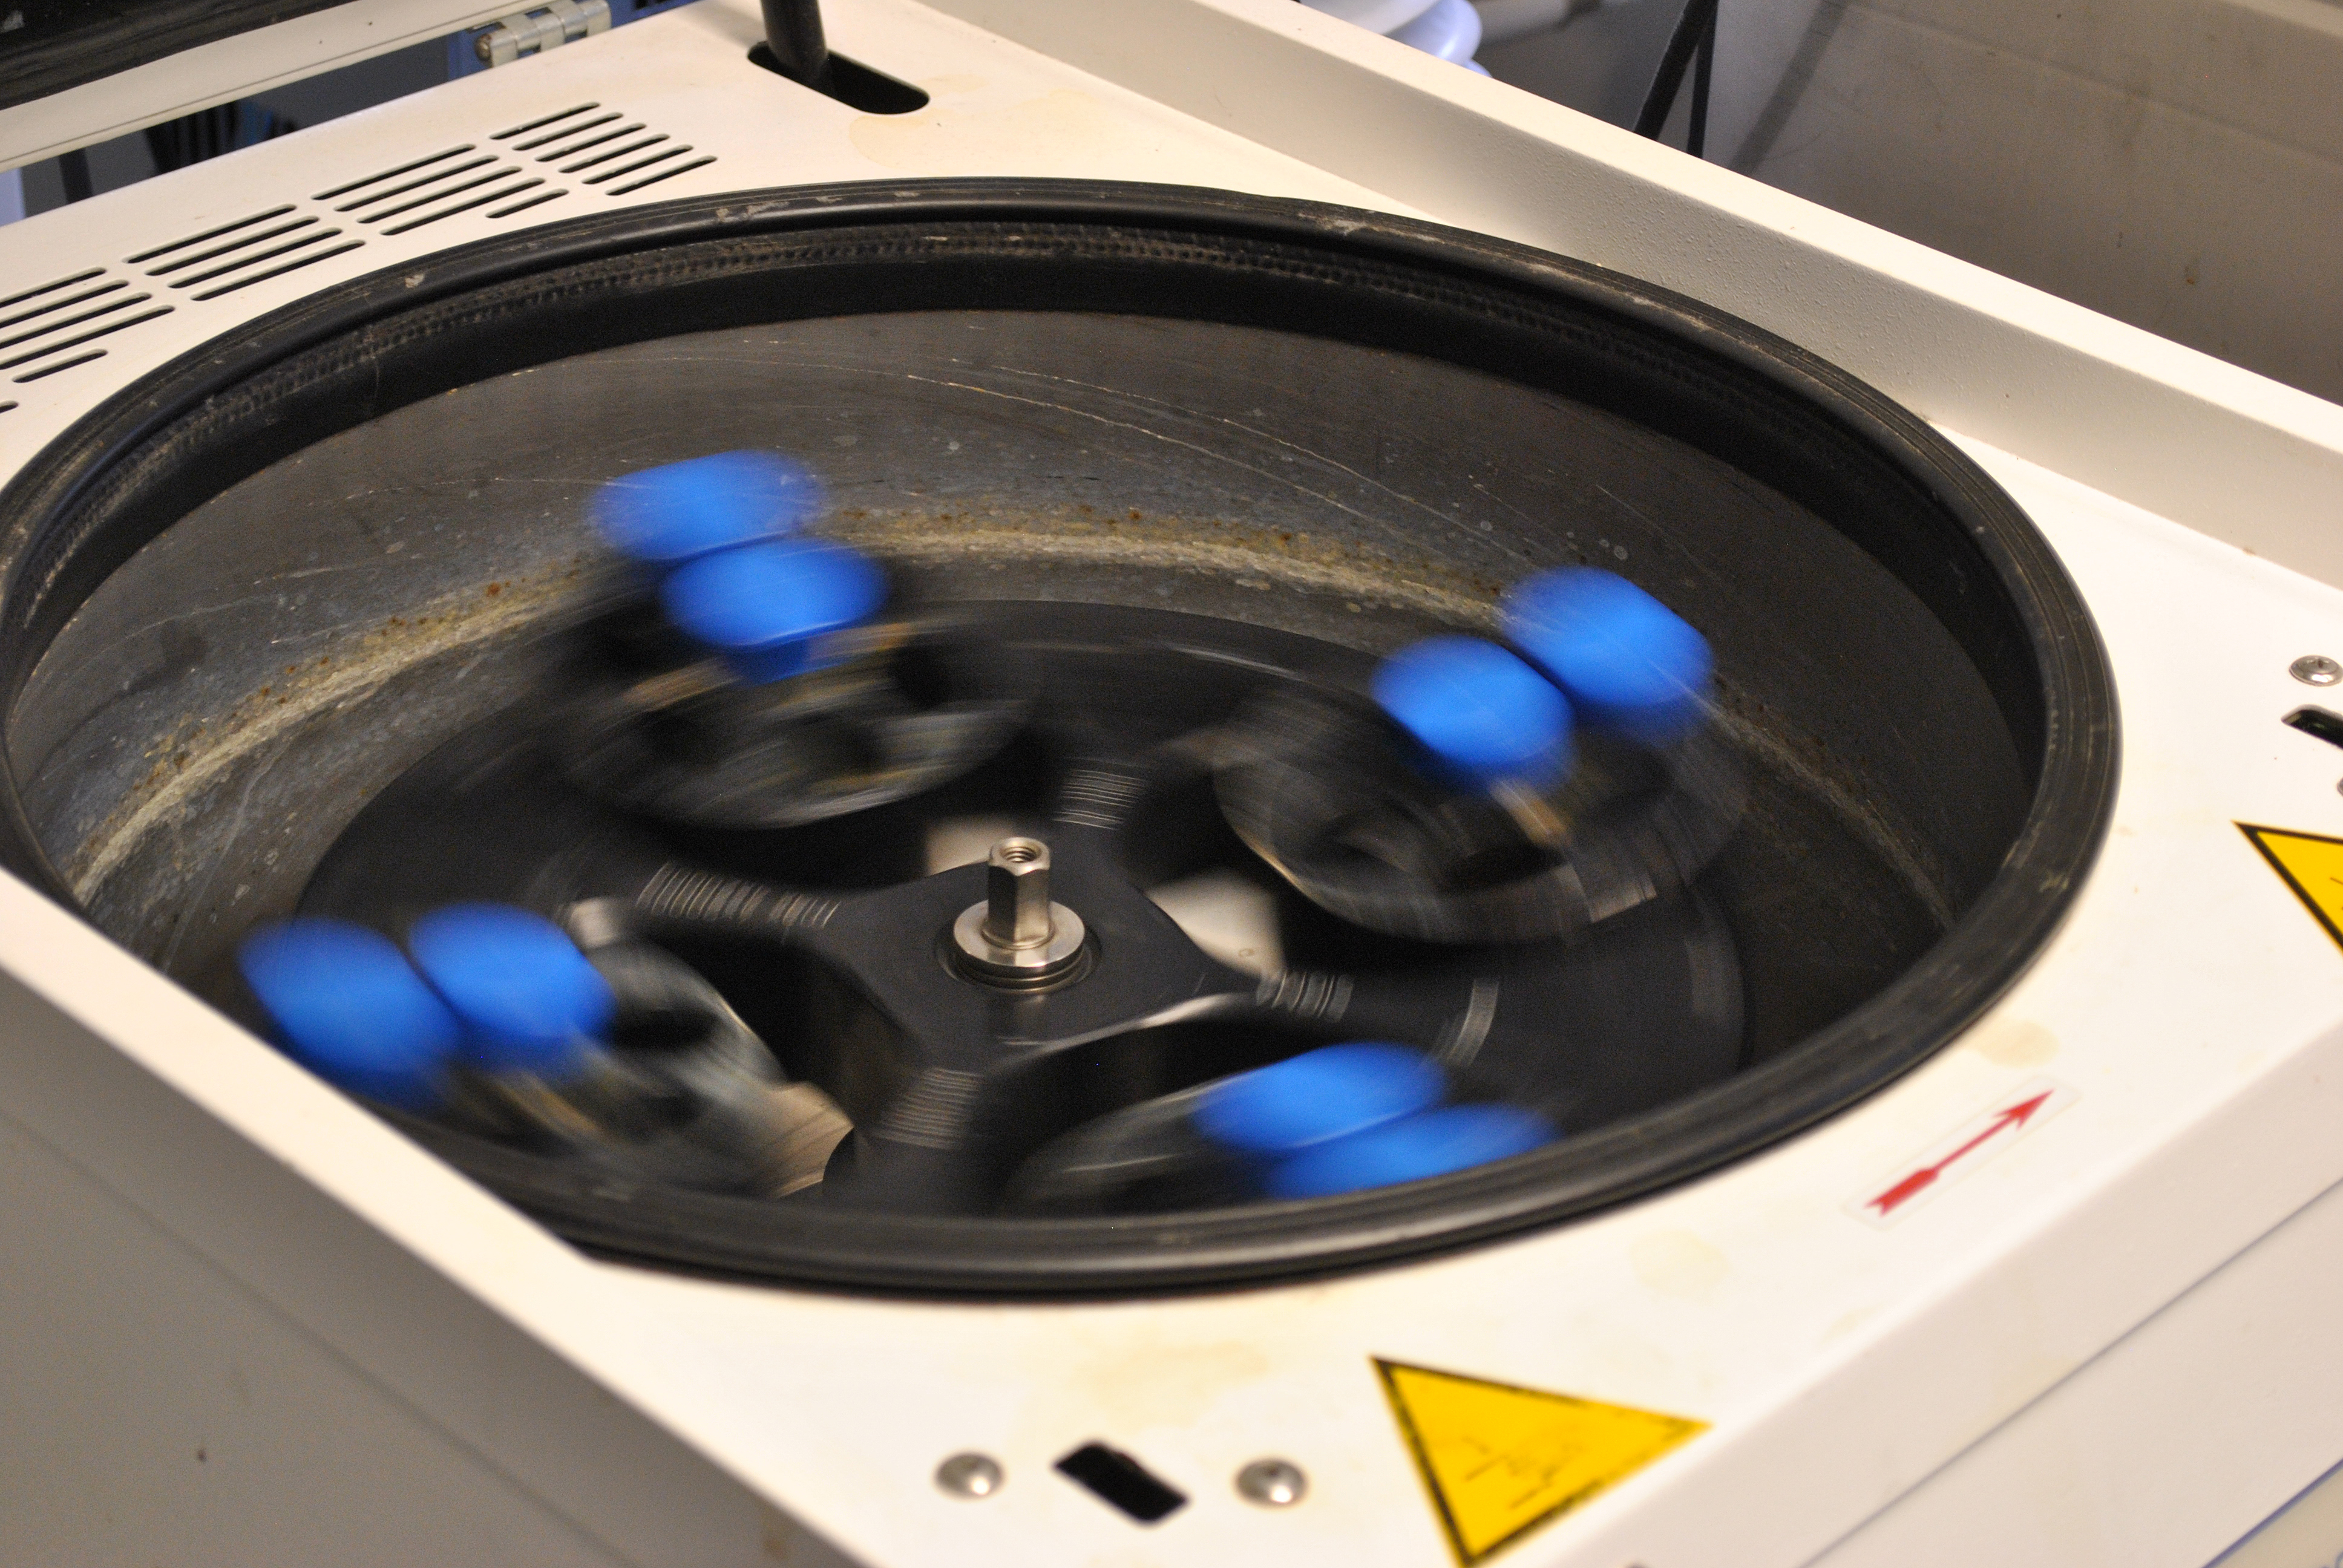 File:Centrifuge with samples rotating slowly.jpg - Wikimedia Commons